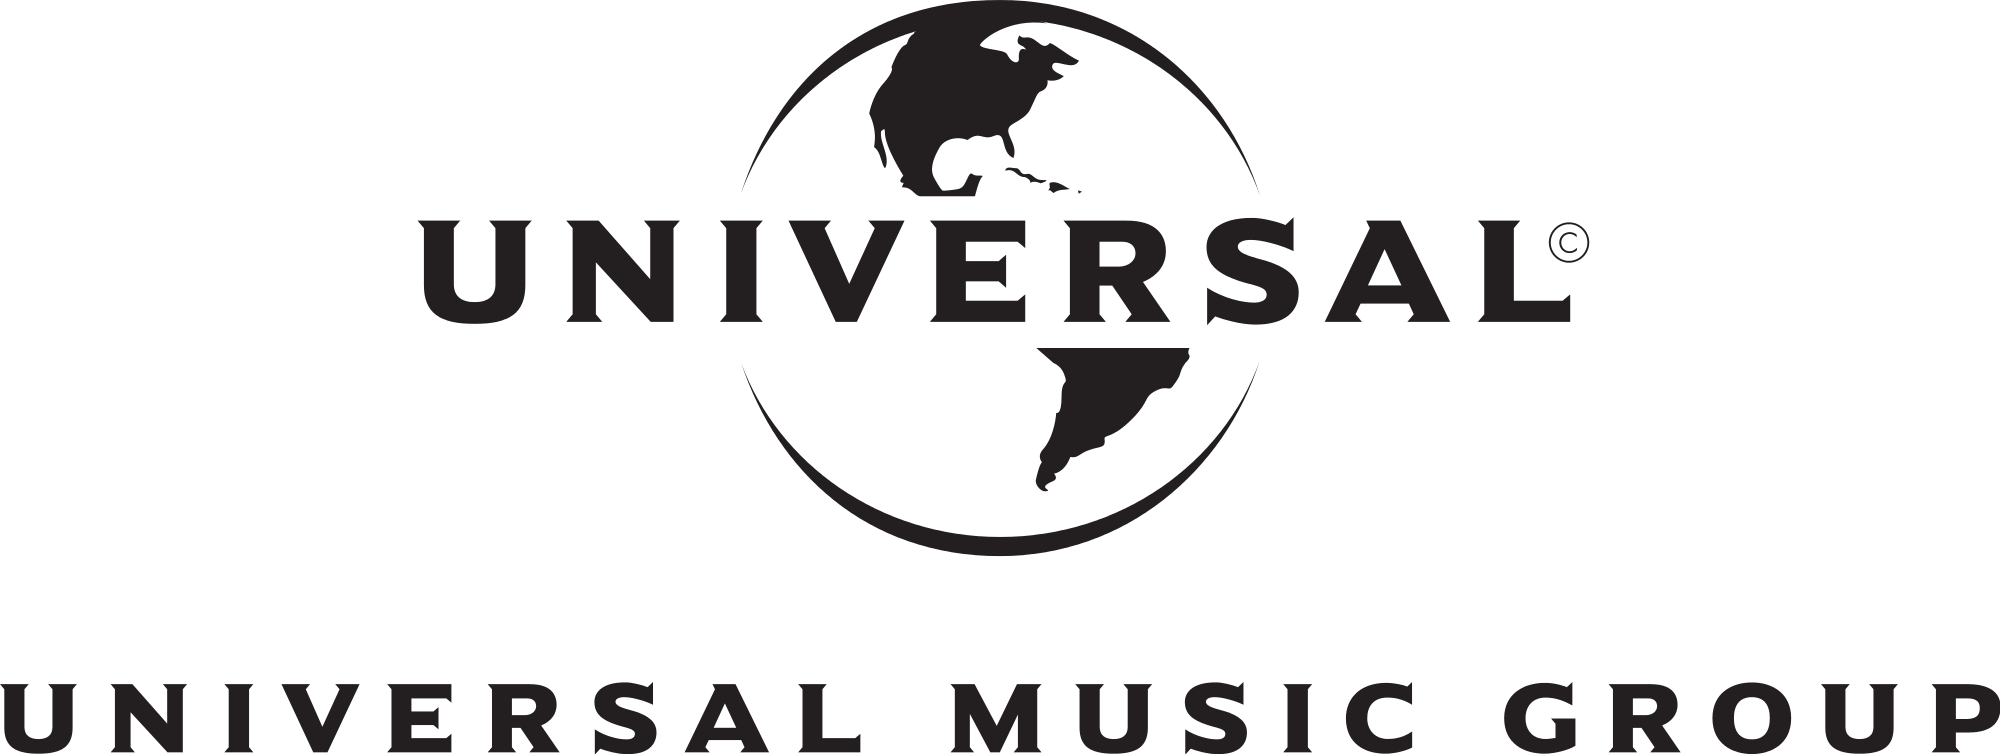 Musi Logo - Universal Music Group, the world's leading music company | Home Page ...